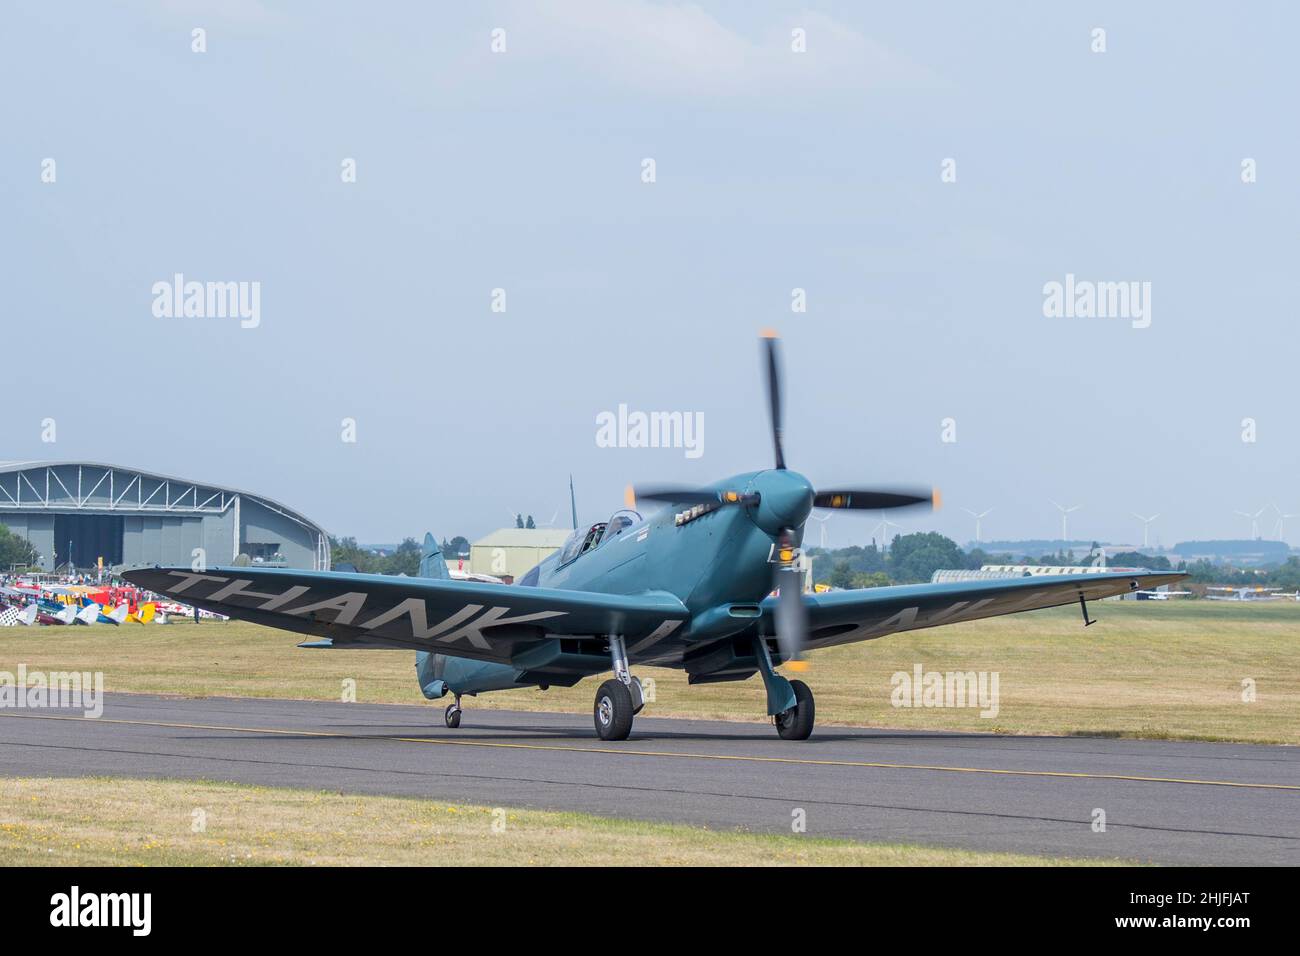 Thank U NHS spitfire taxi-ing at Duxford Airshow 2021 Stock Photo